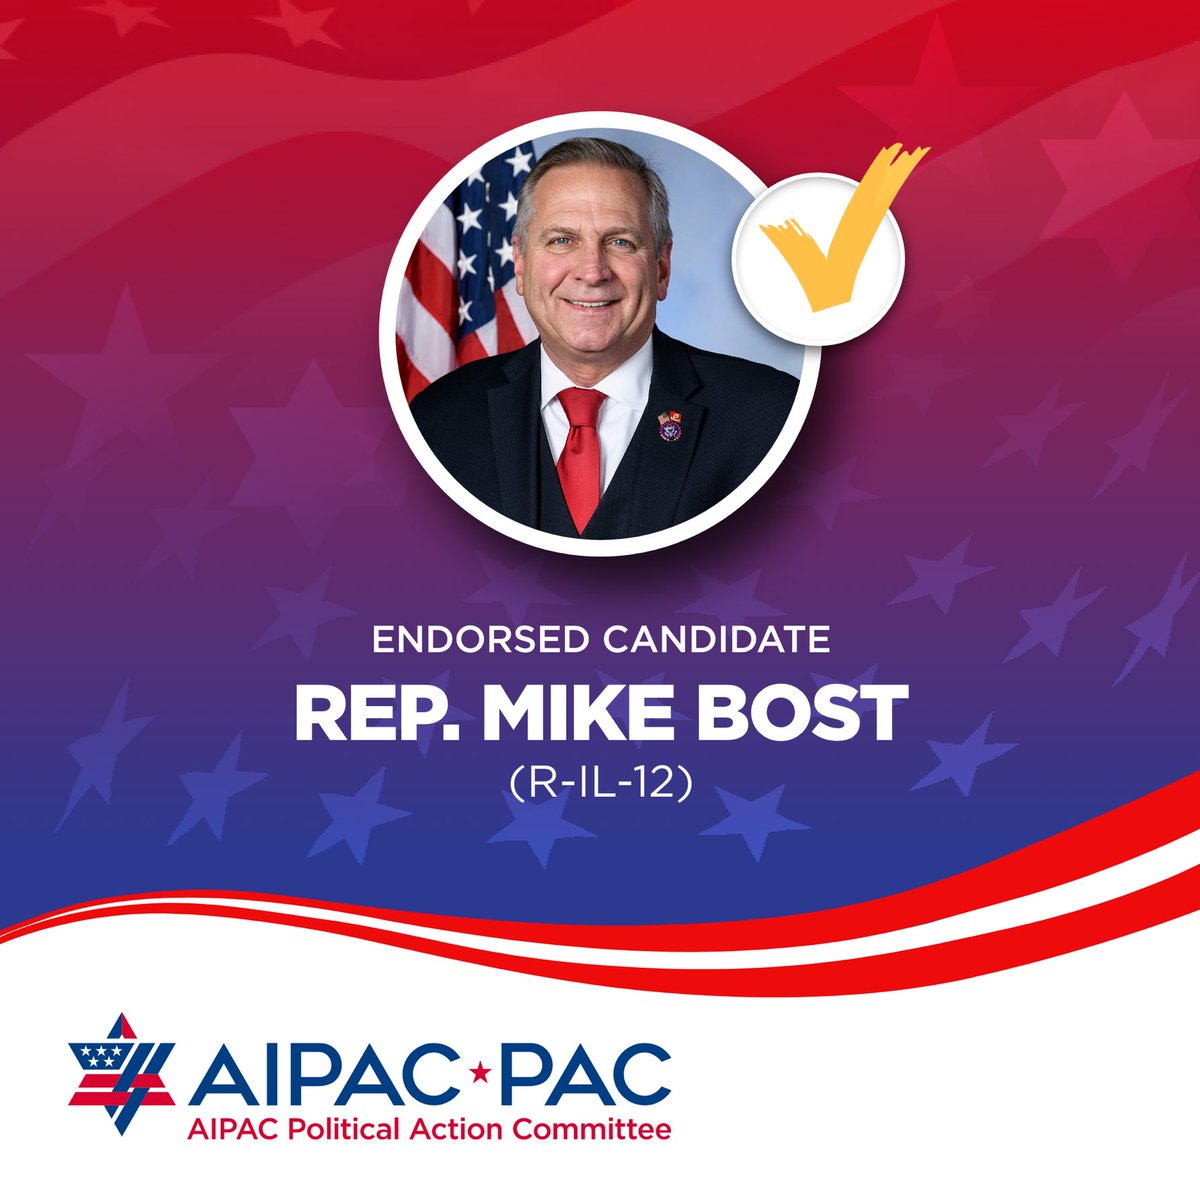 Congratulations to AIPAC-endorsed ⁦⁦@BostForCongress⁩ on your primary election victory! AIPAC is proud to stand with pro-Israel candidates who help strengthen and expand the U.S.-Israel relationship. Being pro-Israel is good policy and good politics.